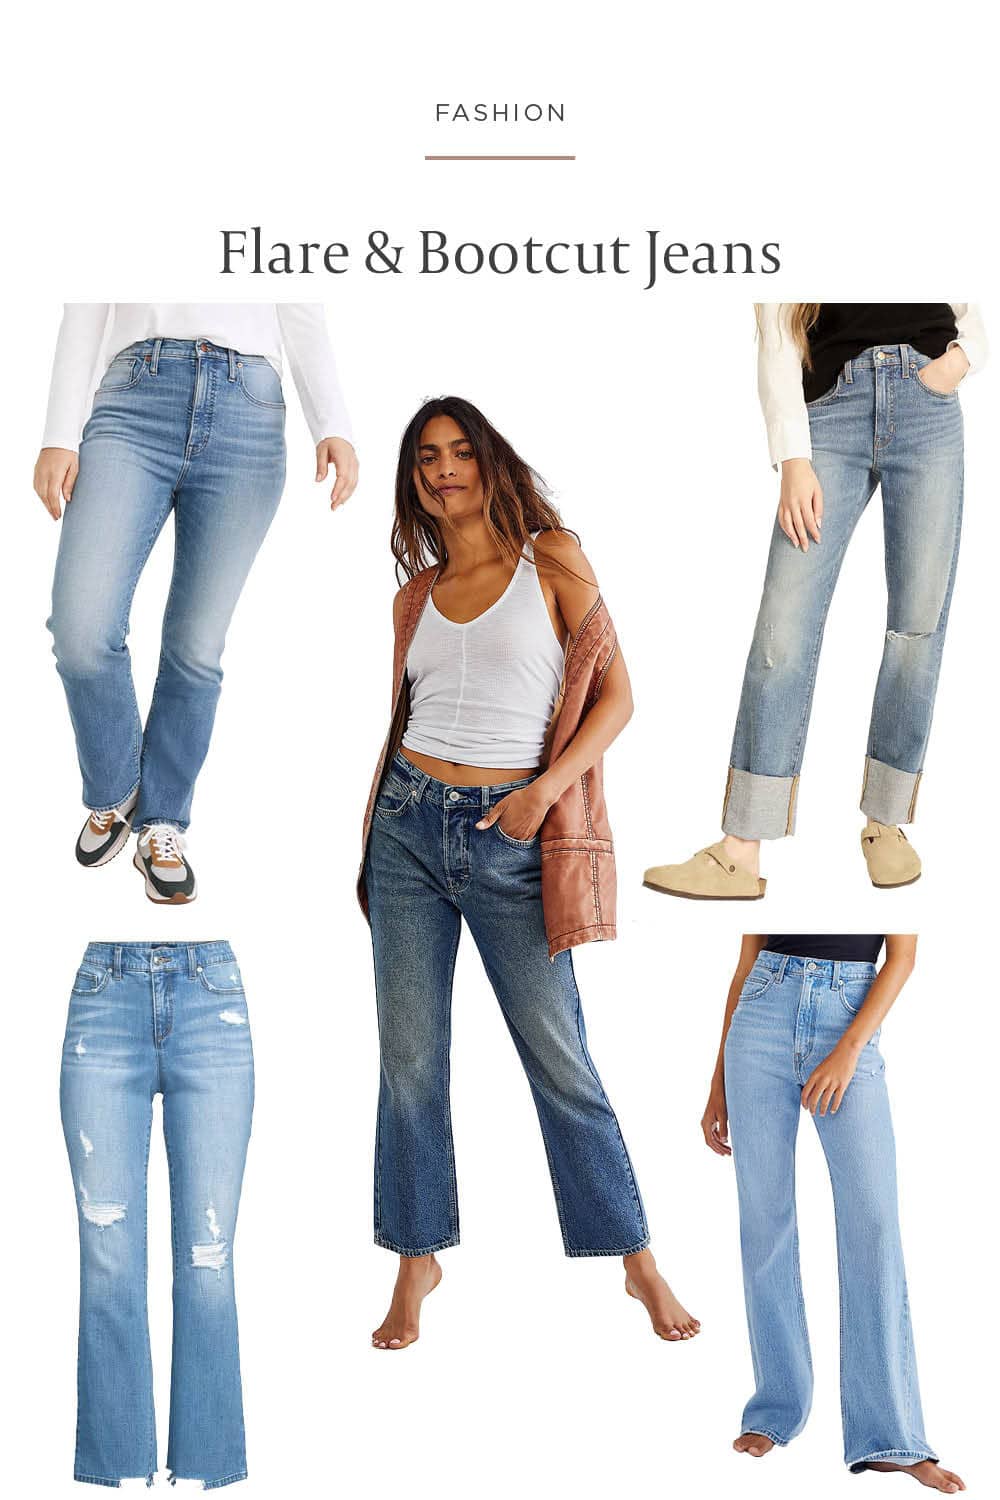 Trending Jeans - The flare and boot cut jeans are fitted until the ankle